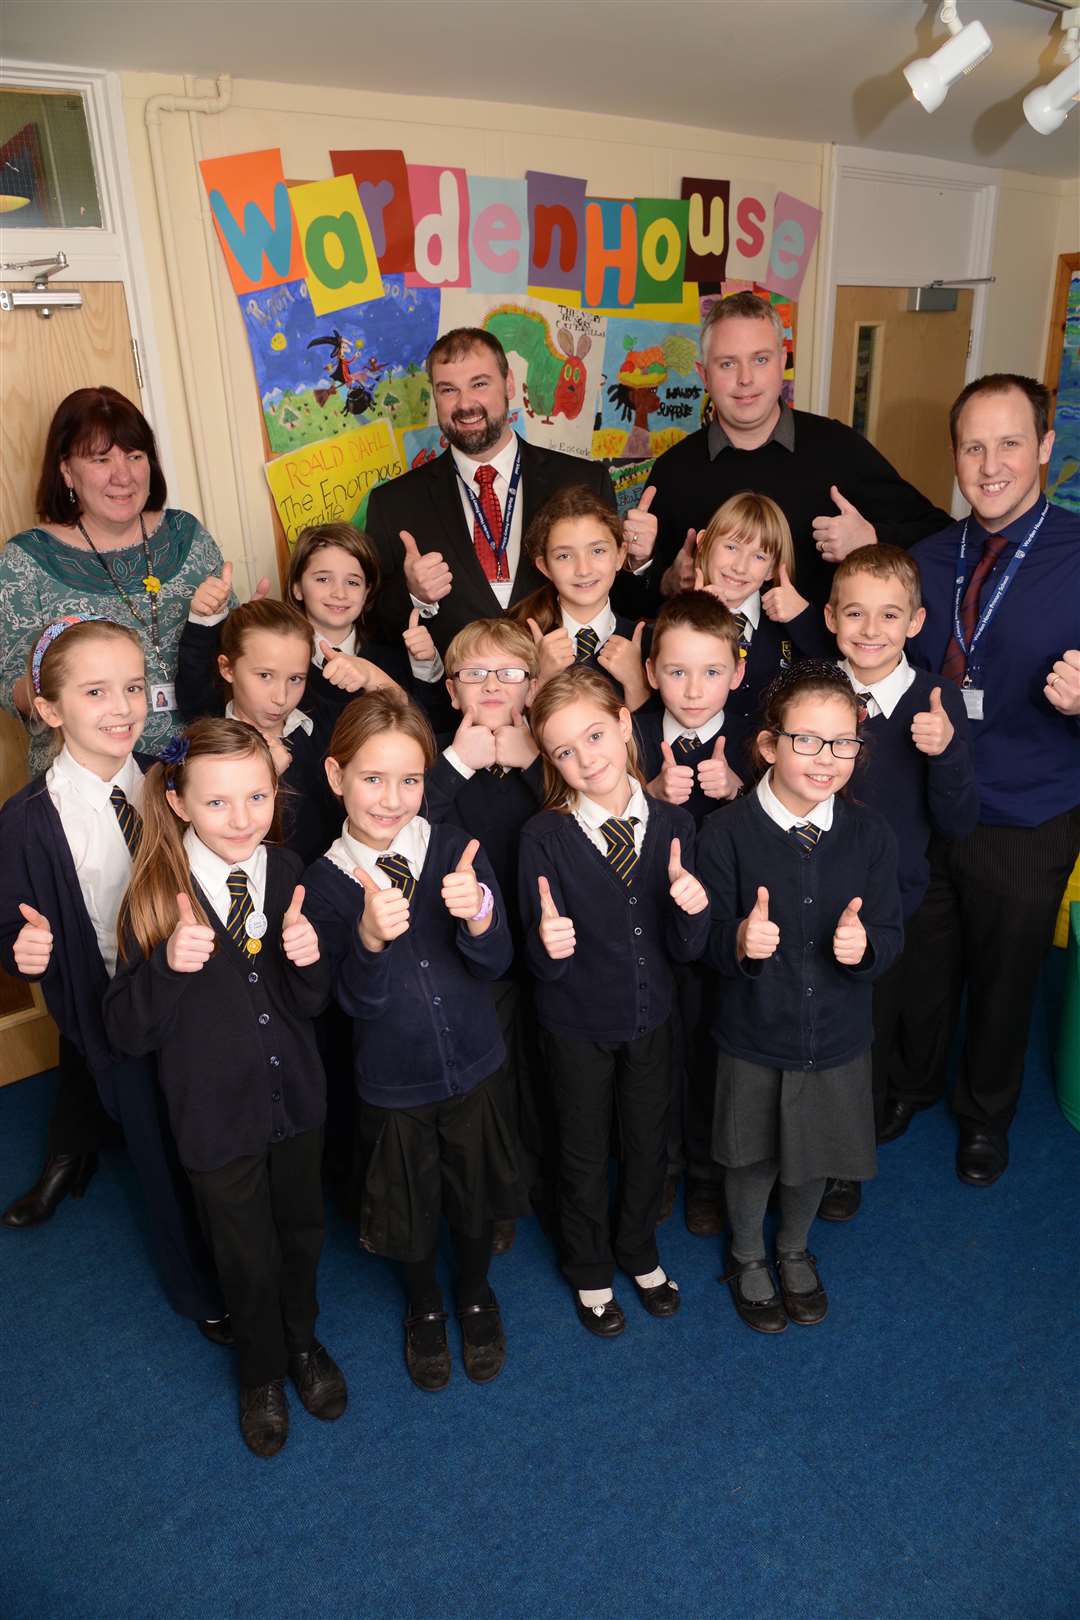 Principal Graham Chisnell, deputy principal Anne-Marie Middleton, senior teachers Rob Hackett and Adam Atkinson and pupils give the report a thumbs up